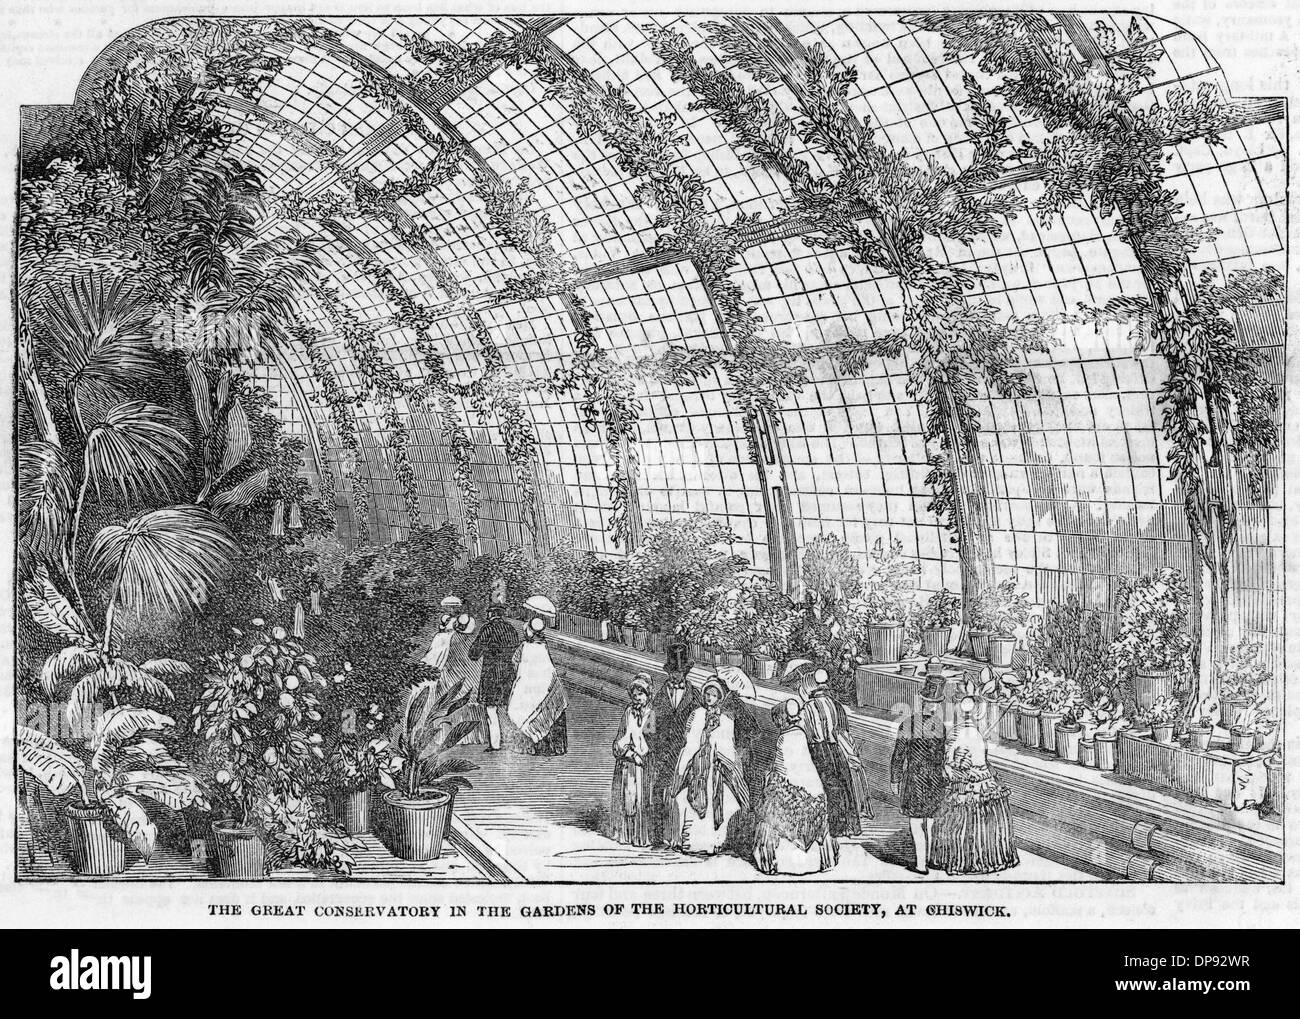 Orticultural Society Conservatory, Chiswick, Londra 1850 Foto Stock